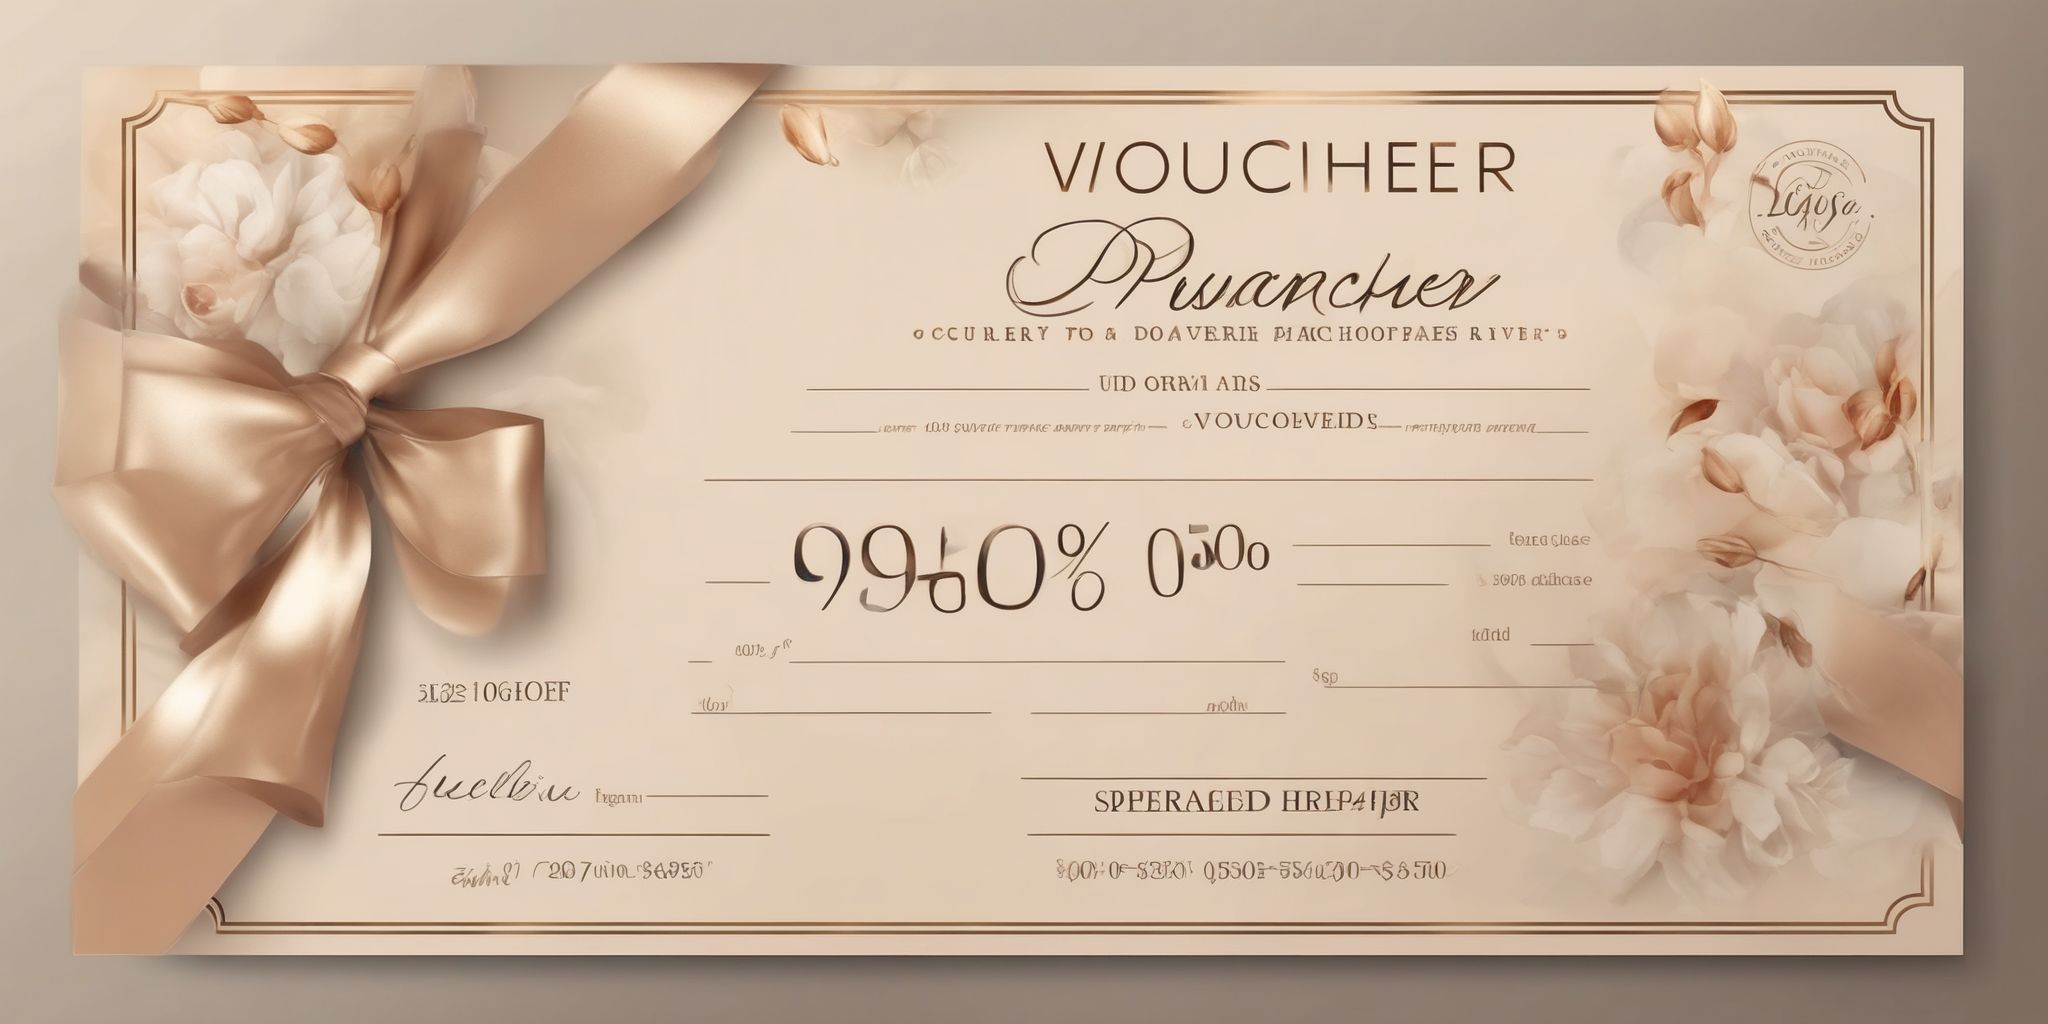 Voucher  in realistic, photographic style